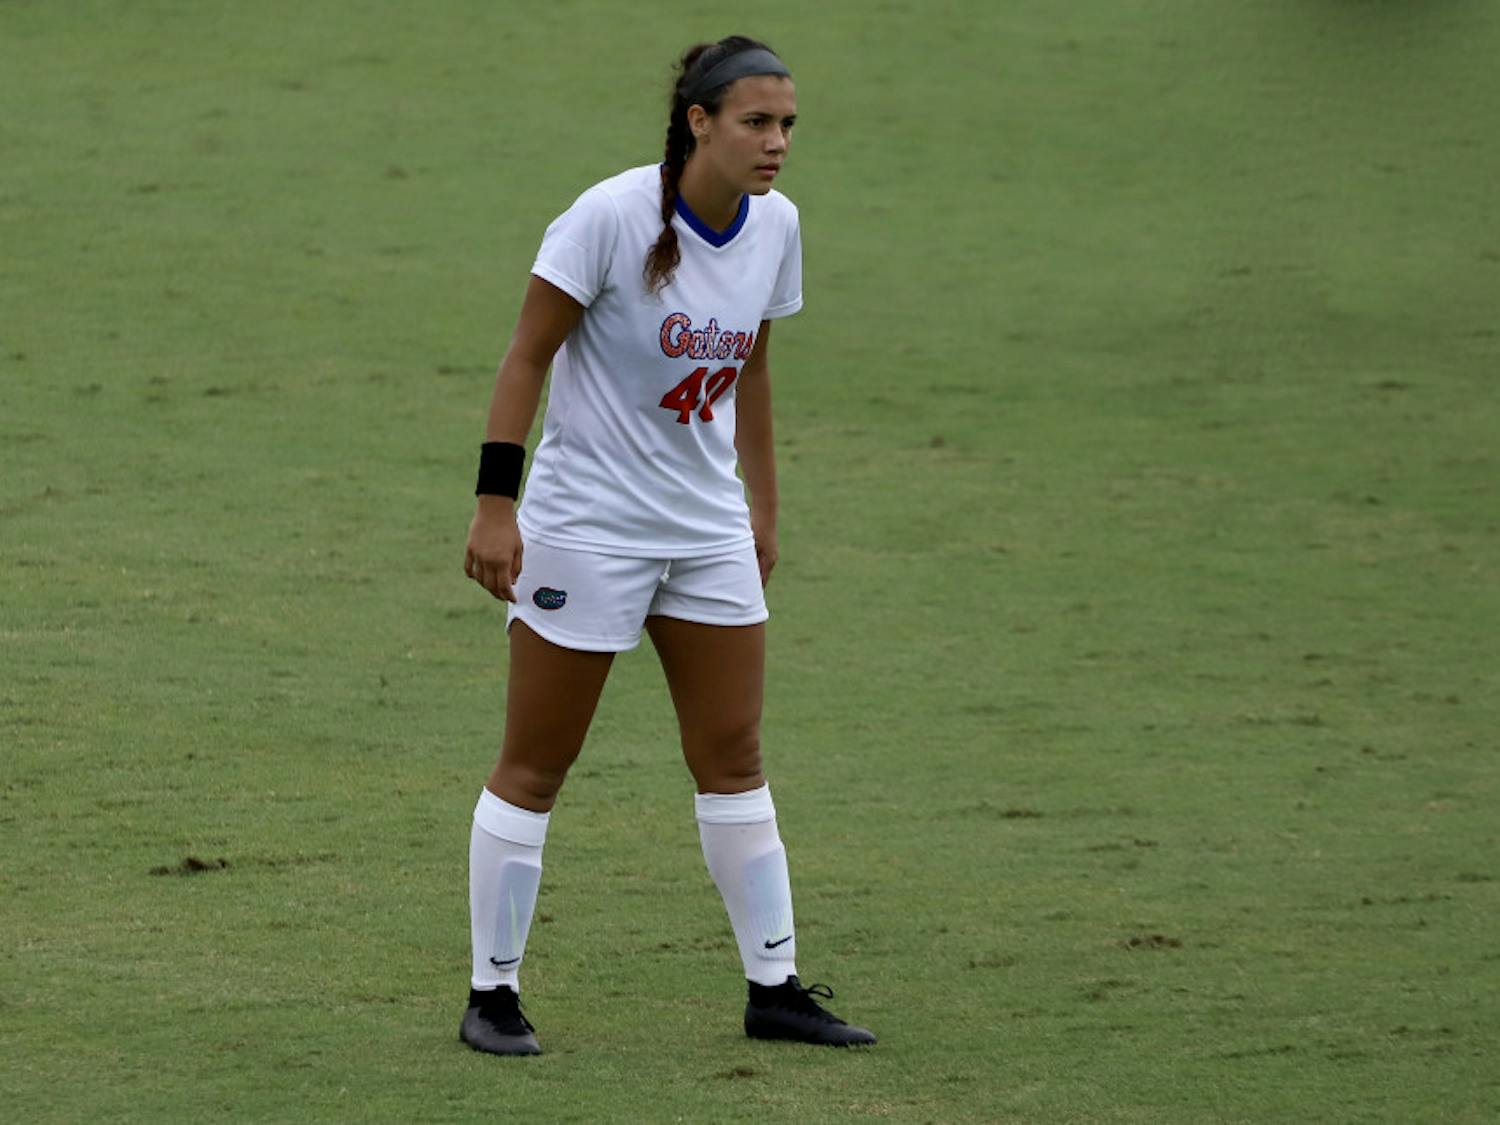 Sophomore forward Alivia Gonzalez nailed a game-winning shot in Alabama's goal to protect Florida's unbeaten record.